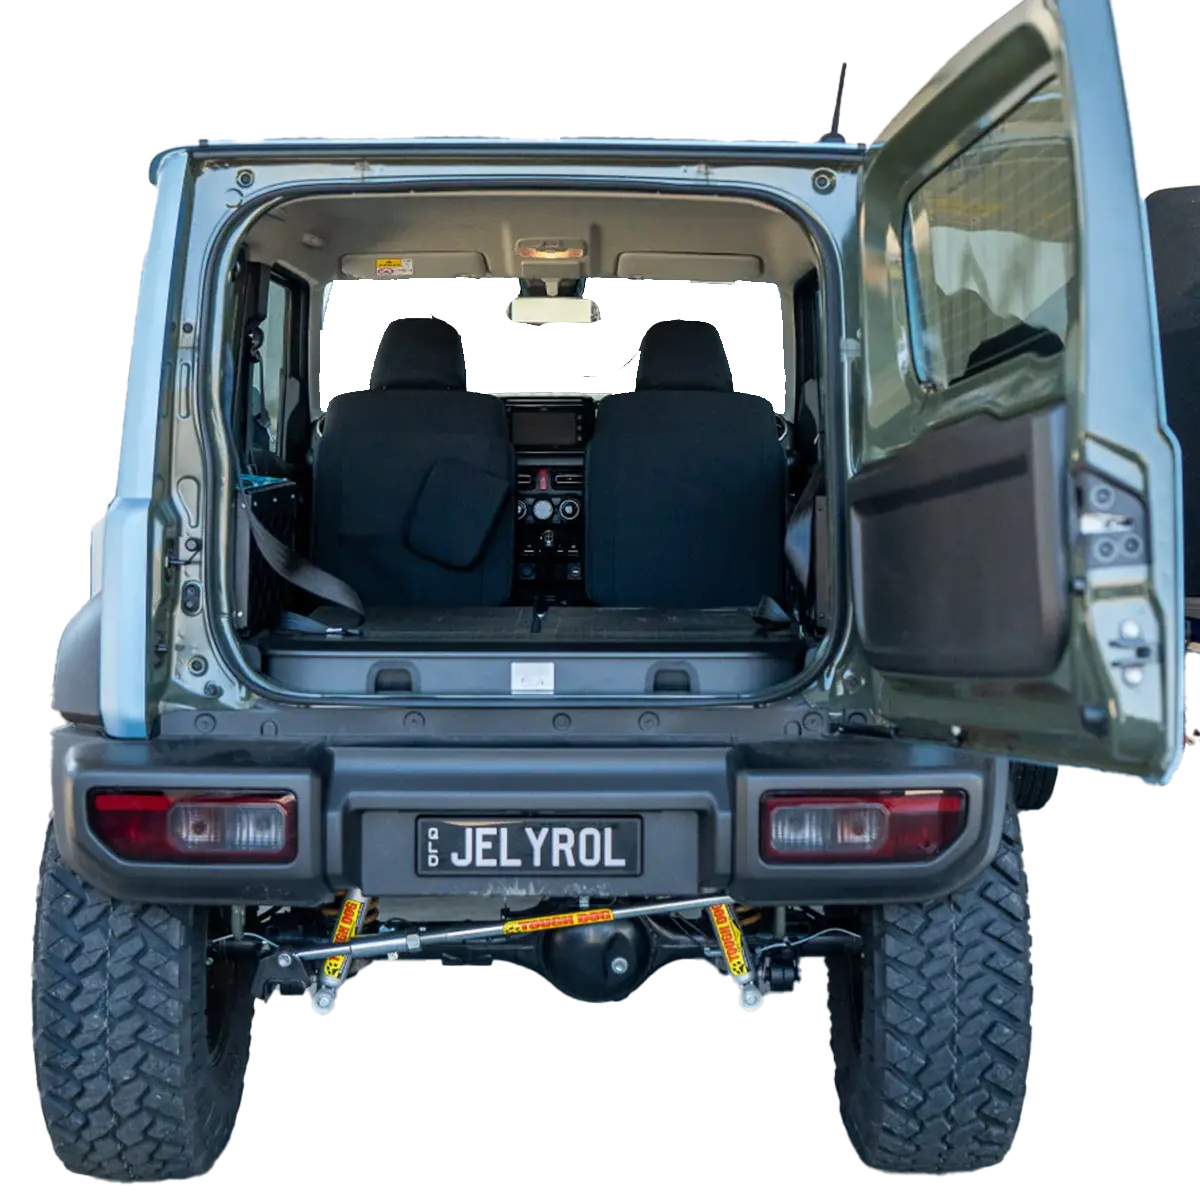 Pirate Camp Co. - REAR DOOR STRUT EXTENSION FOR JIMNY JB74